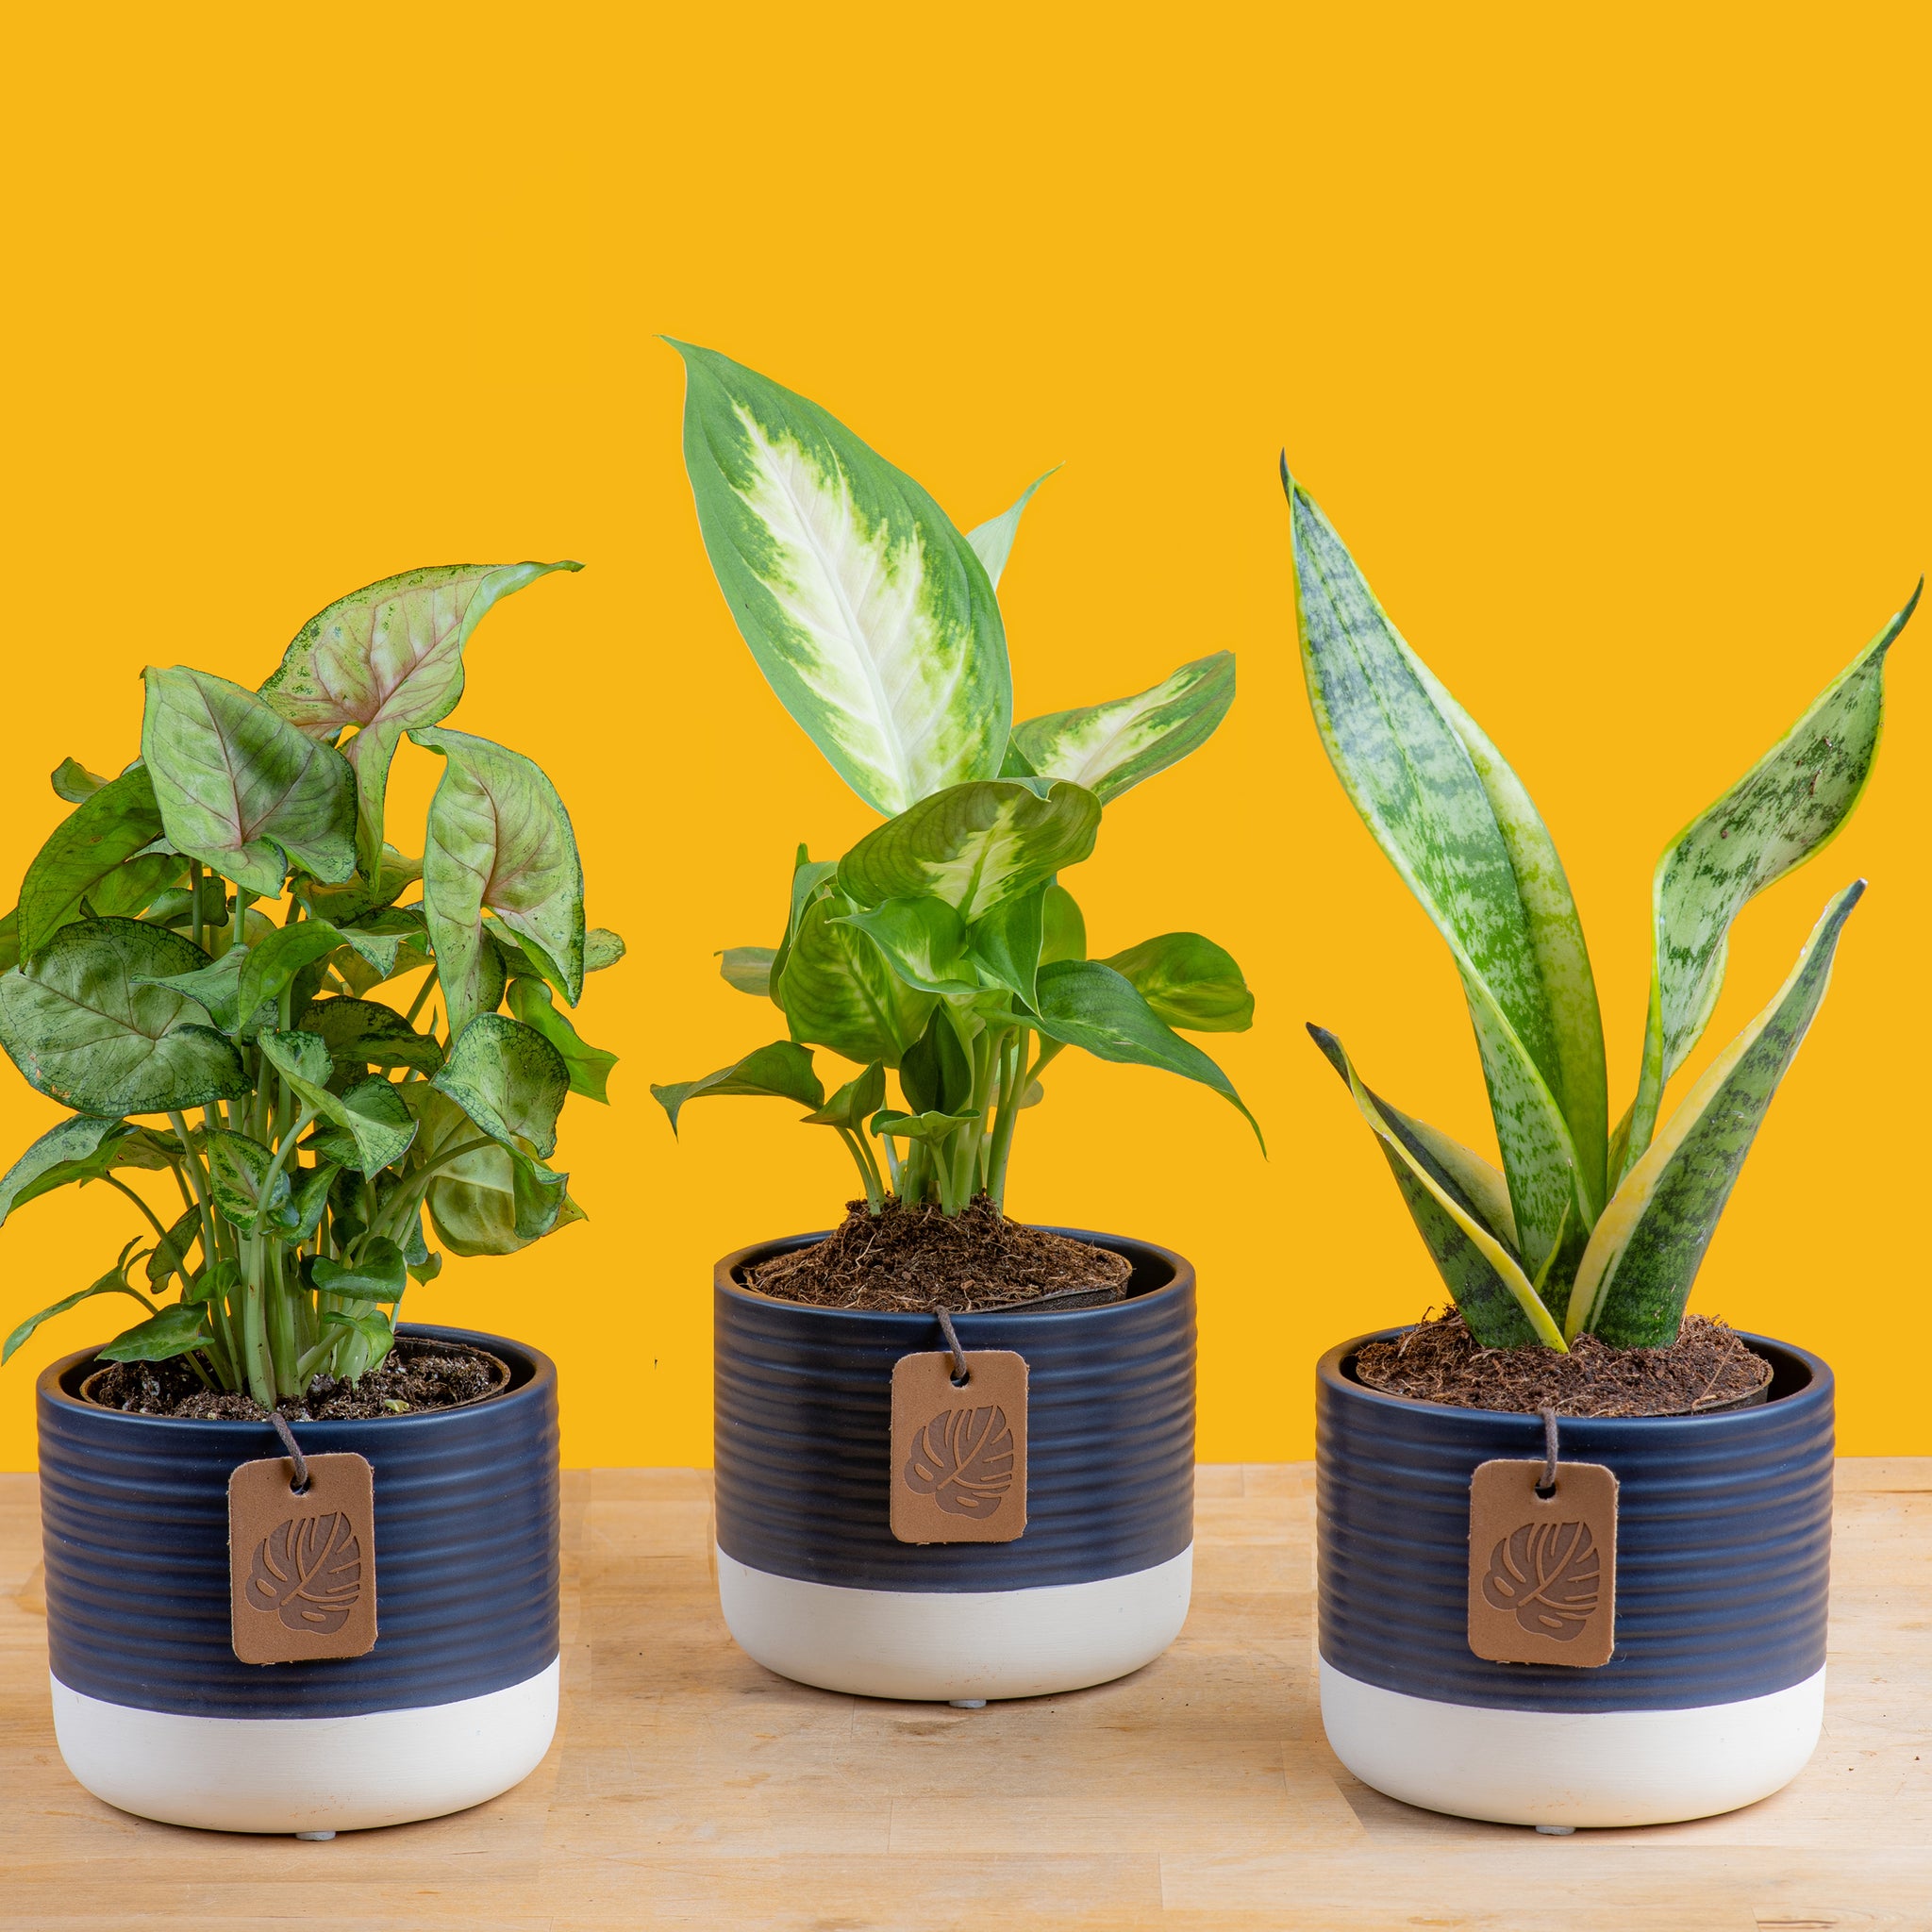 a pack of 3 clean air plant in a two tone blue and white ceramic pot set against a bright yellow background, the plants are a variety mix